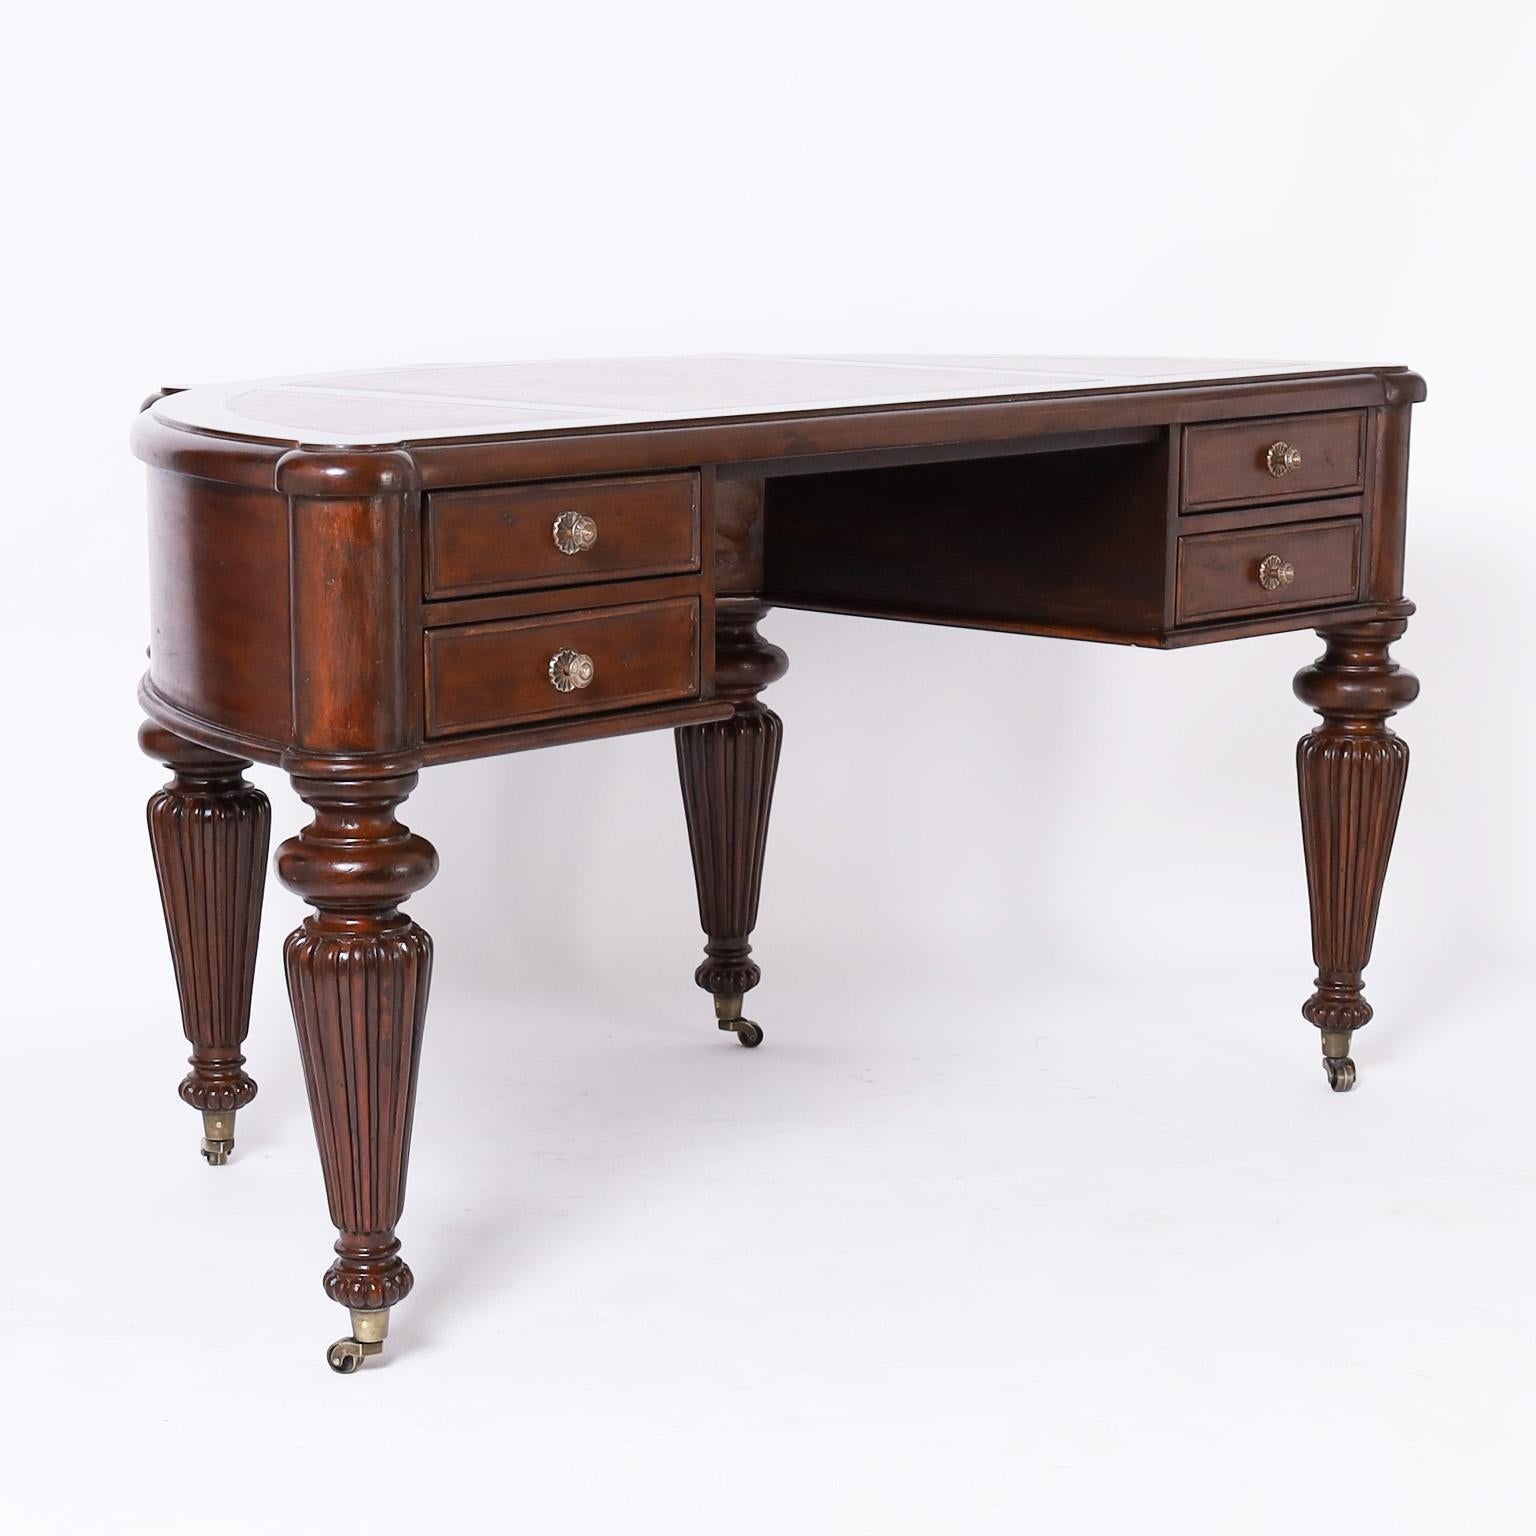 British colonial style desk crafted in mahogany in a demilune form with a tooled tan leather top, four drawers and featuring bold turned and beaded legs on brass casters.